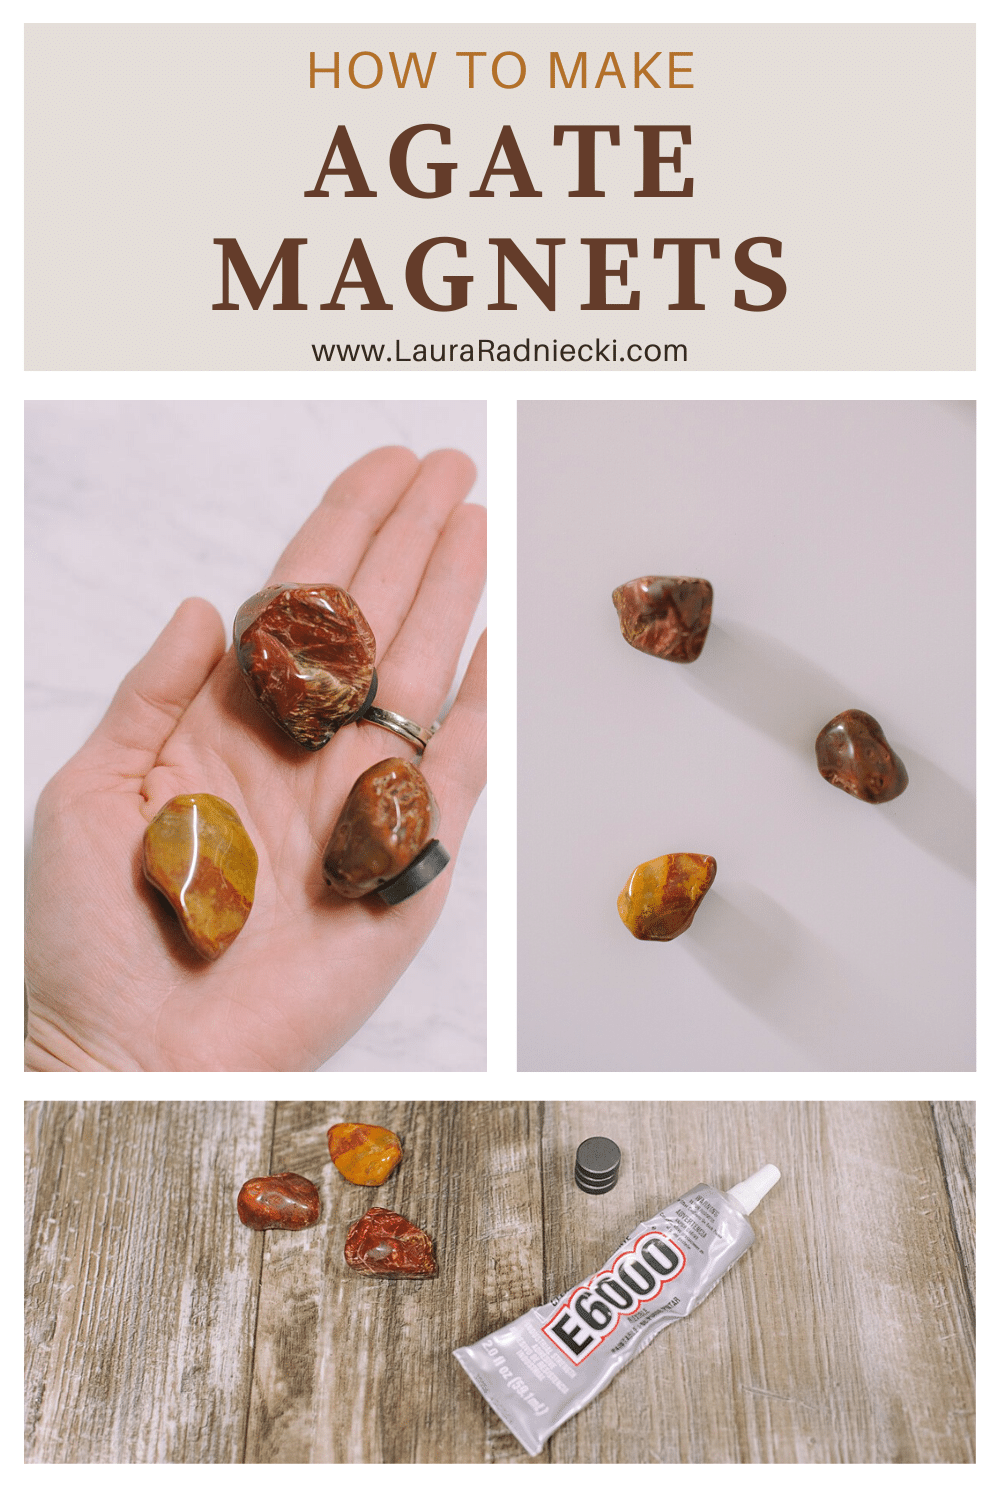 How to Make Agate Magnets | DIY Rock Magnets